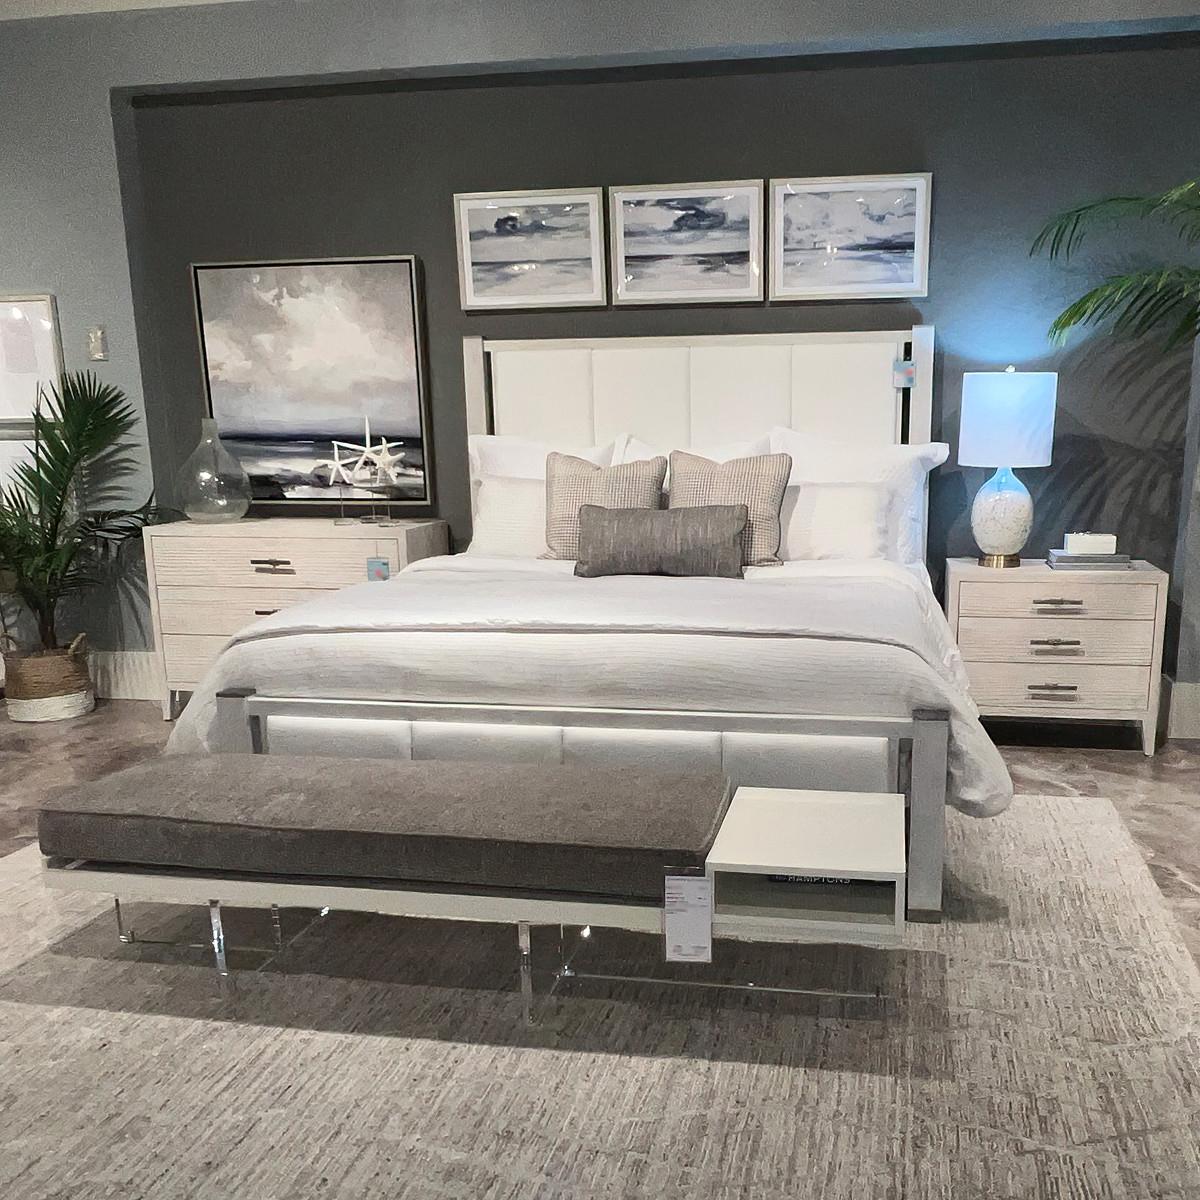 Coastal Breeze King Size bed, handmade Upholstered US King Bed, crafted with channeled upholstery to the headboard and footboard, finished in our sea salt painted finish with metal accents.

Dimensions: 79.75